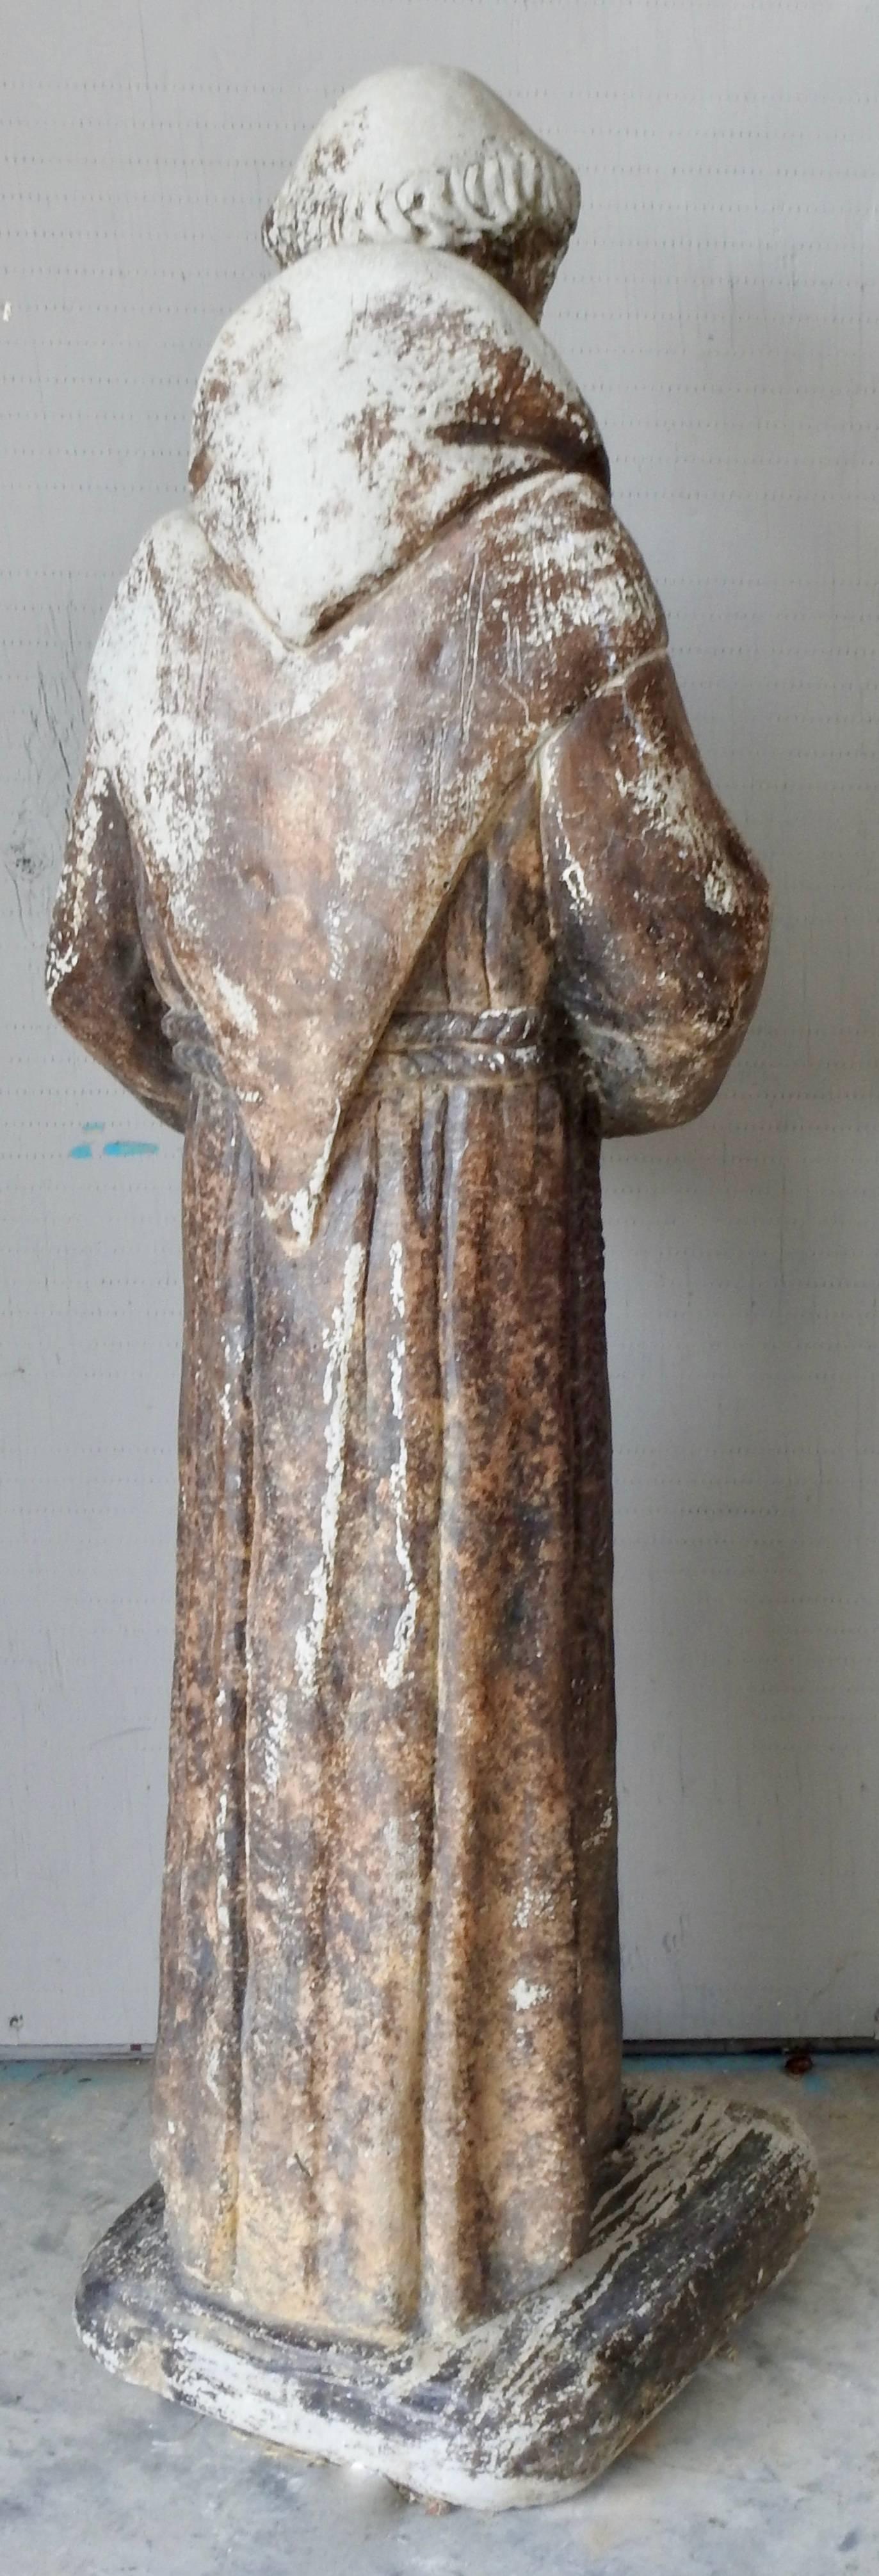 A cast stone garden statue of St. Francis of Assisi. The statue has been outside and has developed a weathered patina which adds to his character. The applied colors have faded over the years. He is holding a bird in his hands.
  